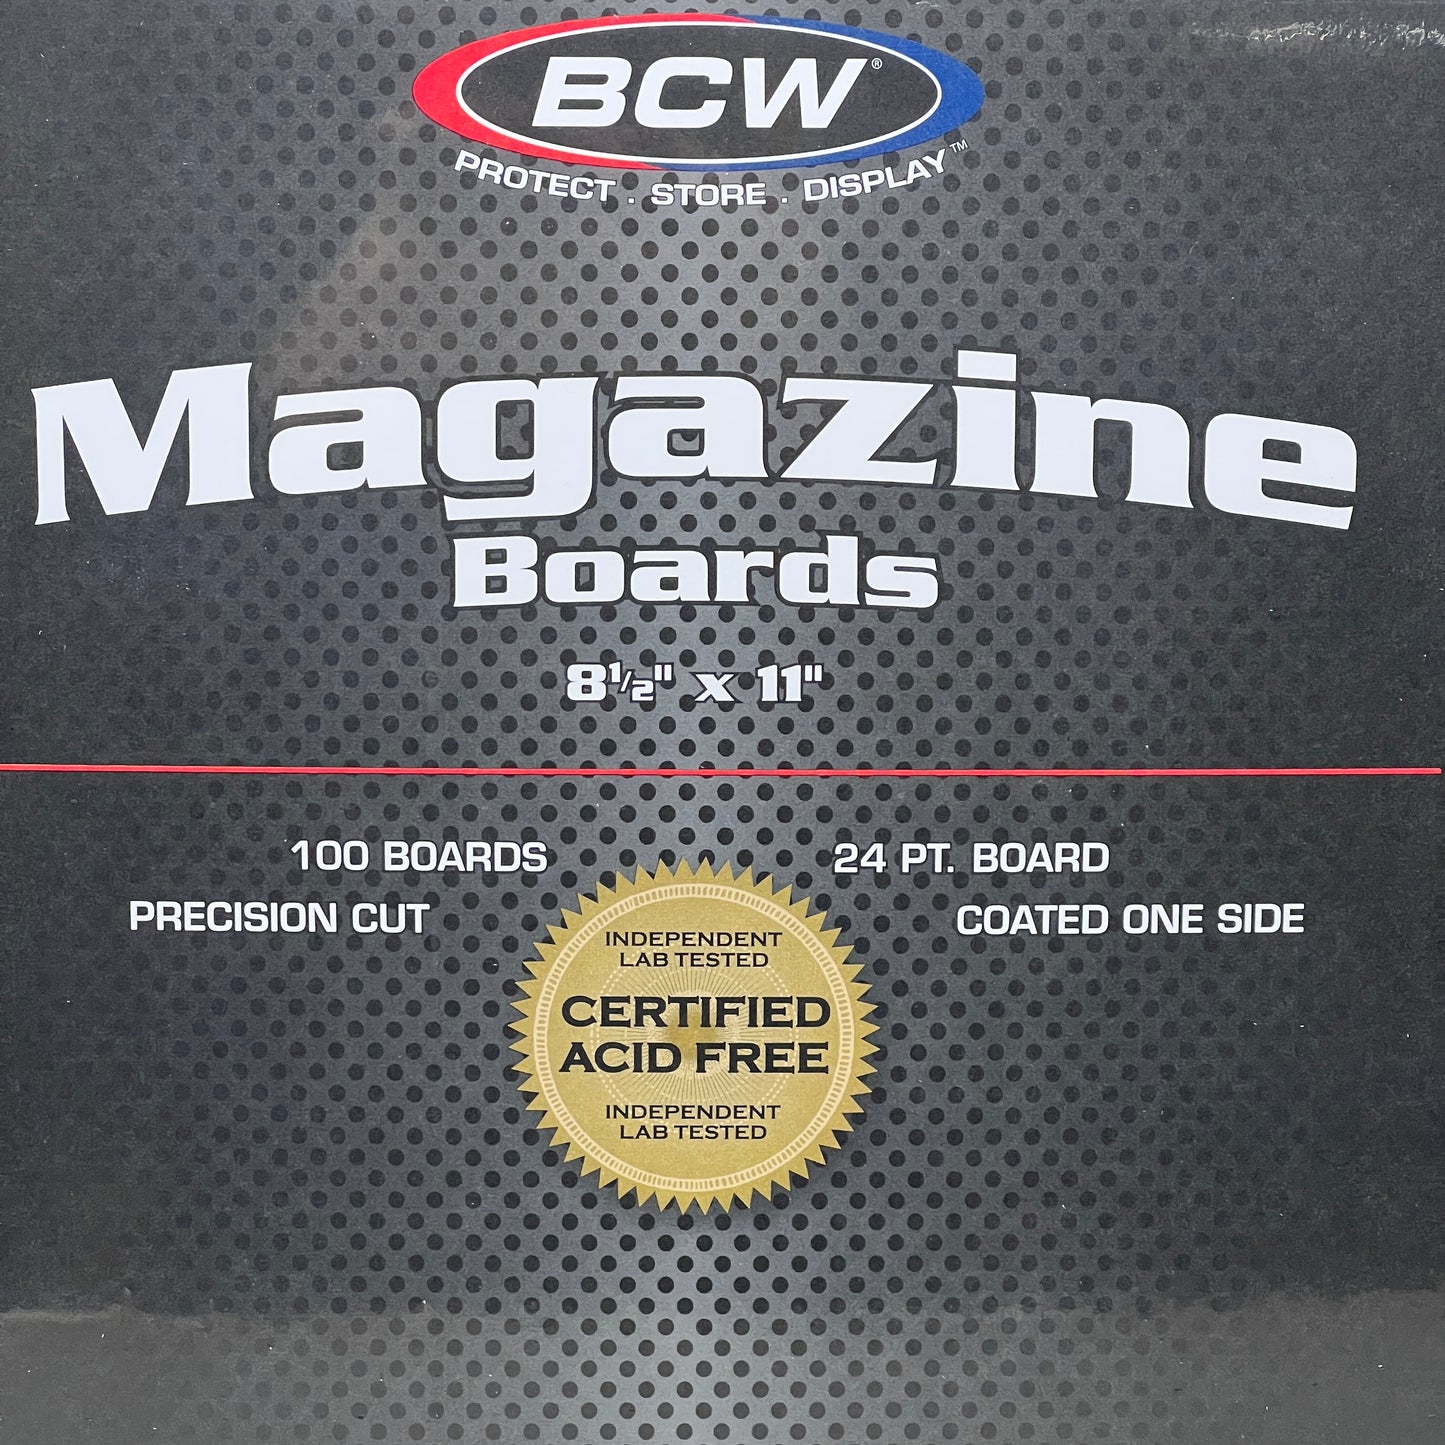 BCW Magazine Boards 100-PACK 8 1/2 - 11 Precision Cut 1-BB-MAG (New)